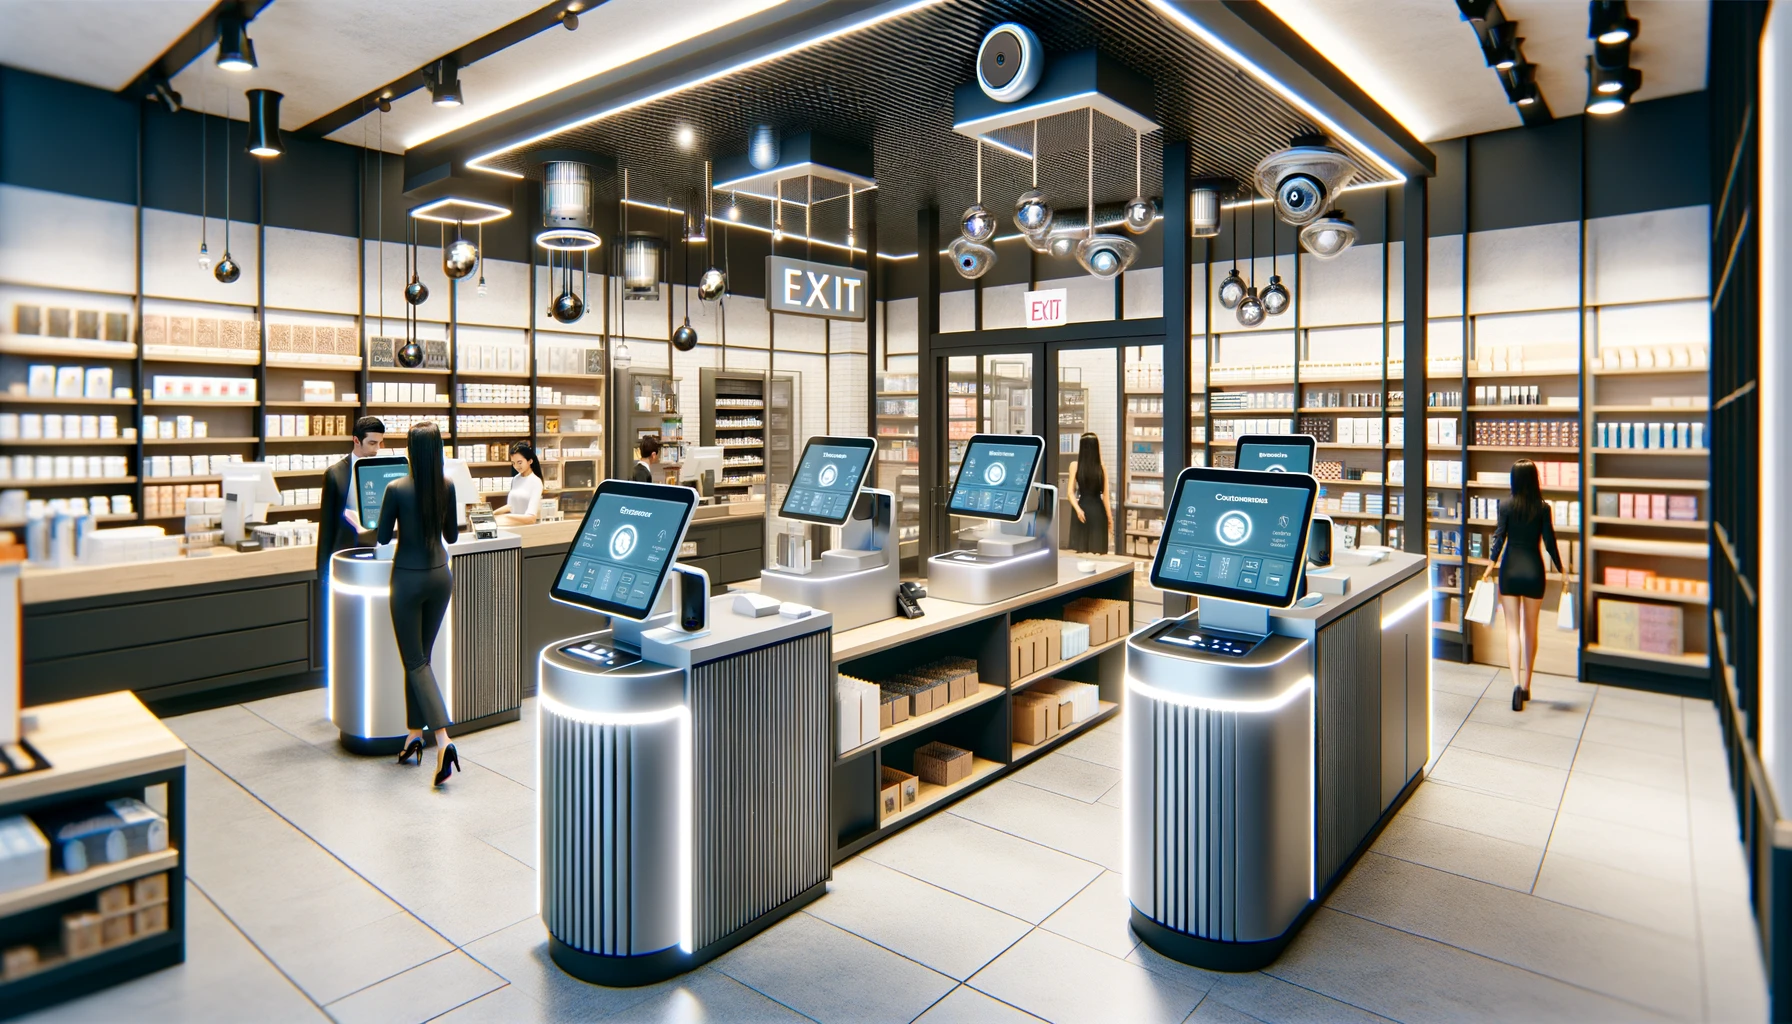 Larger Stores May Face Scalability Challenges with AI-Powered Exit Technology, Despite Checkout Ease